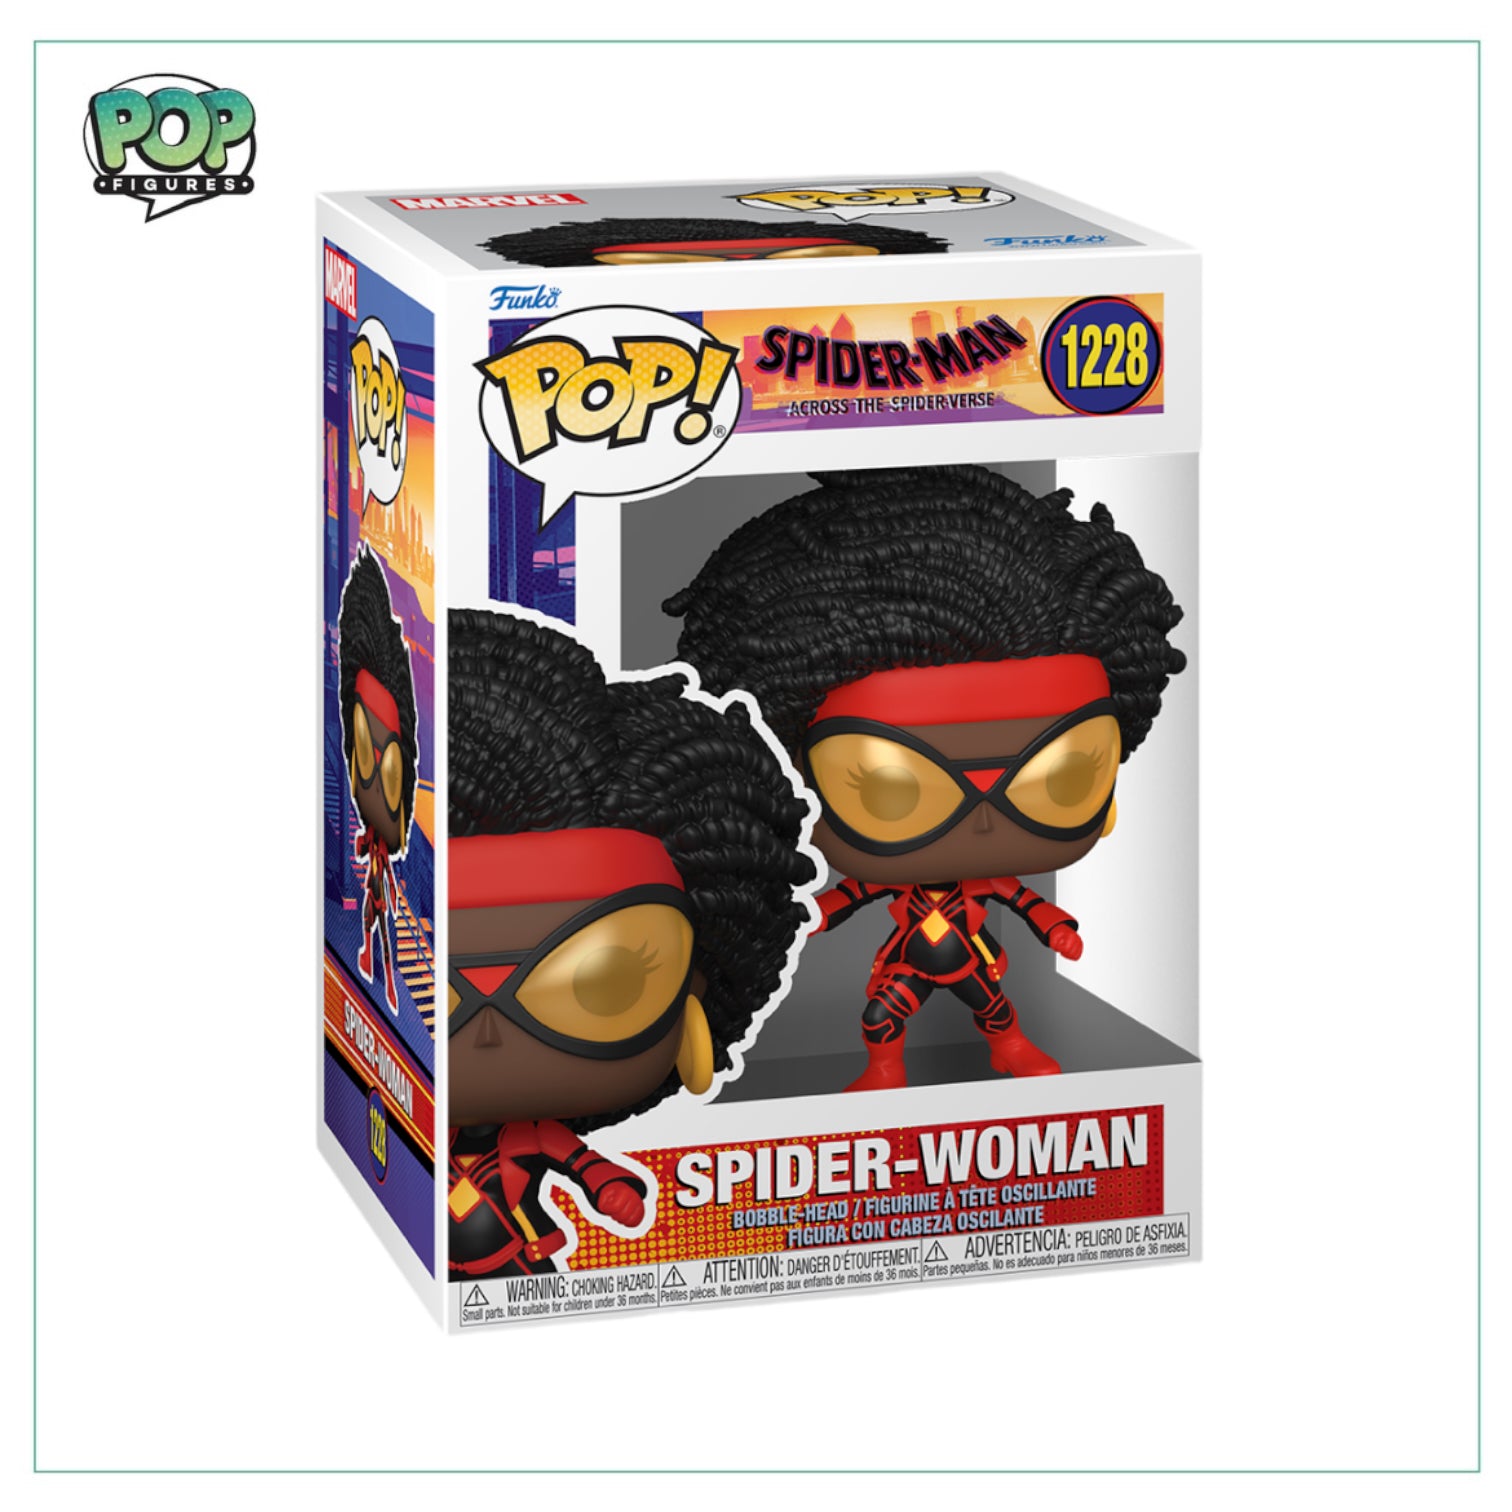 Spider-Woman #1228 Funko Pop! Spider-Man across the Spiderverse